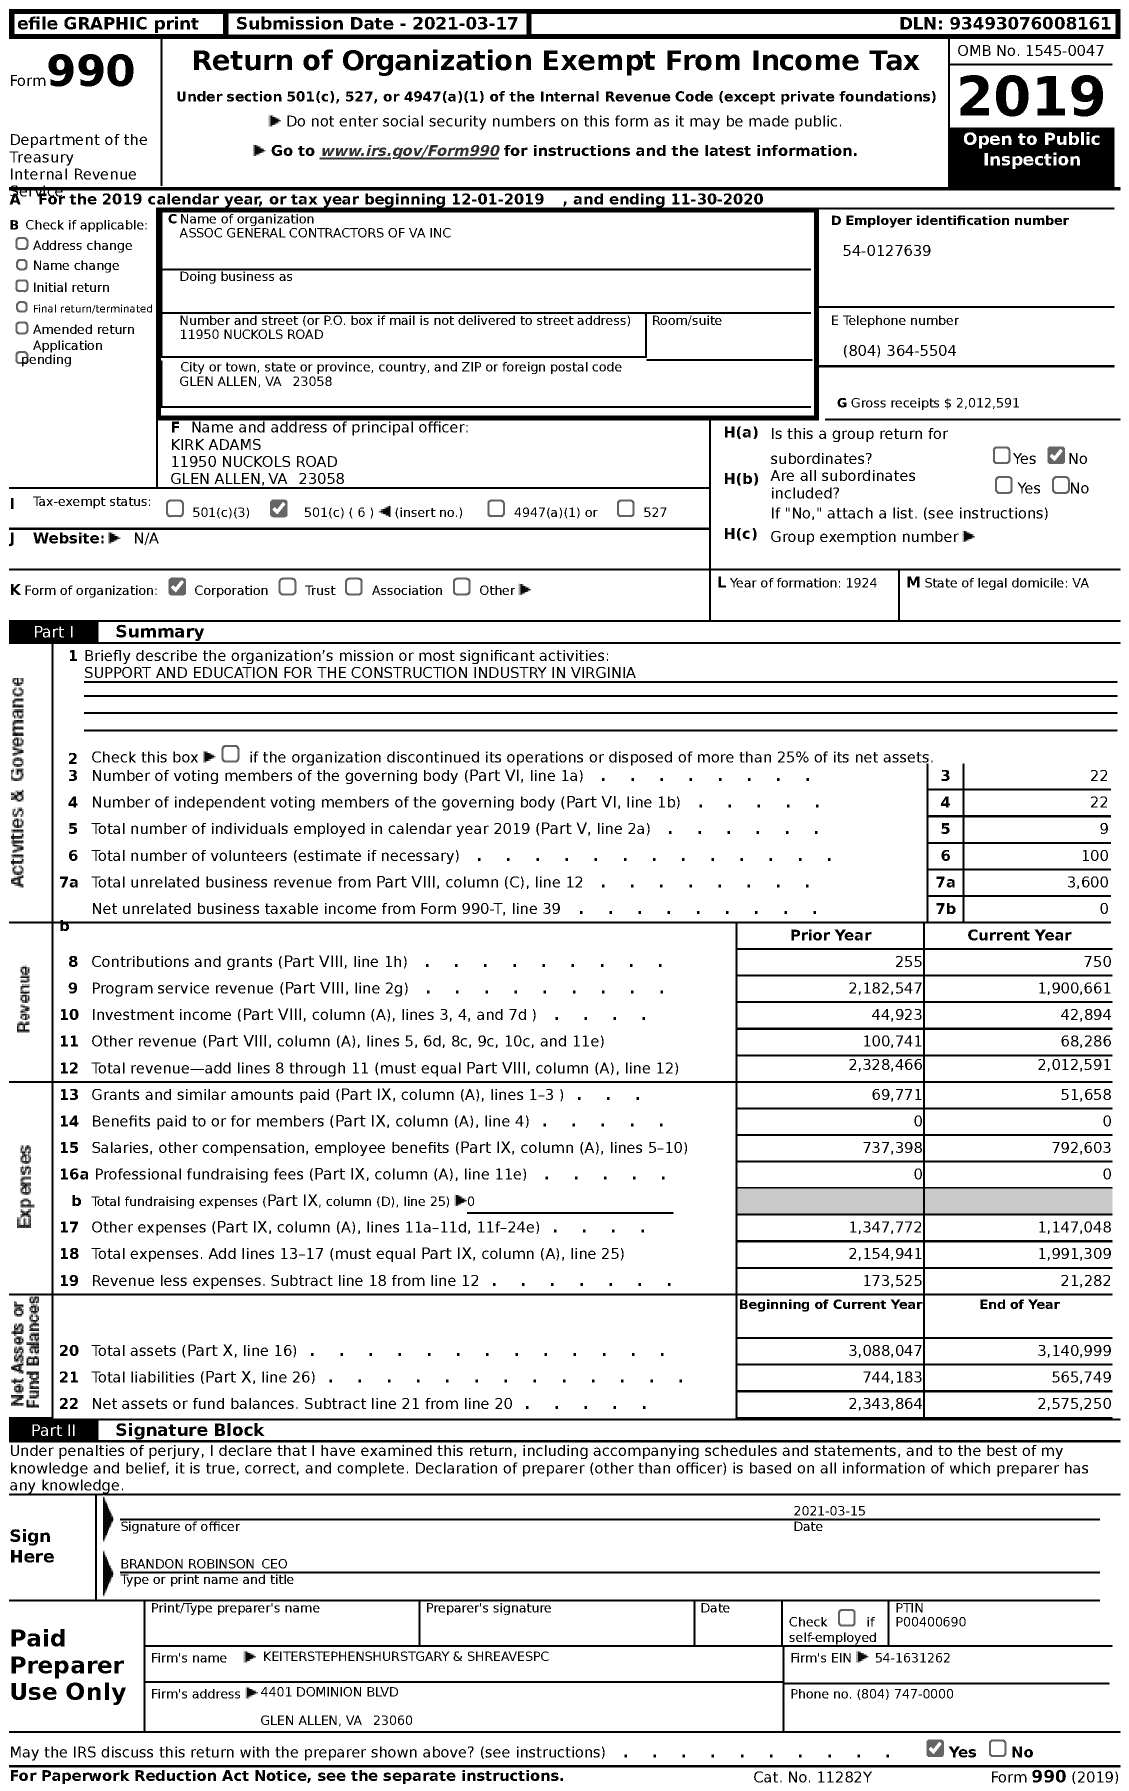 Image of first page of 2019 Form 990 for Association General Contractors of Va (AGC)